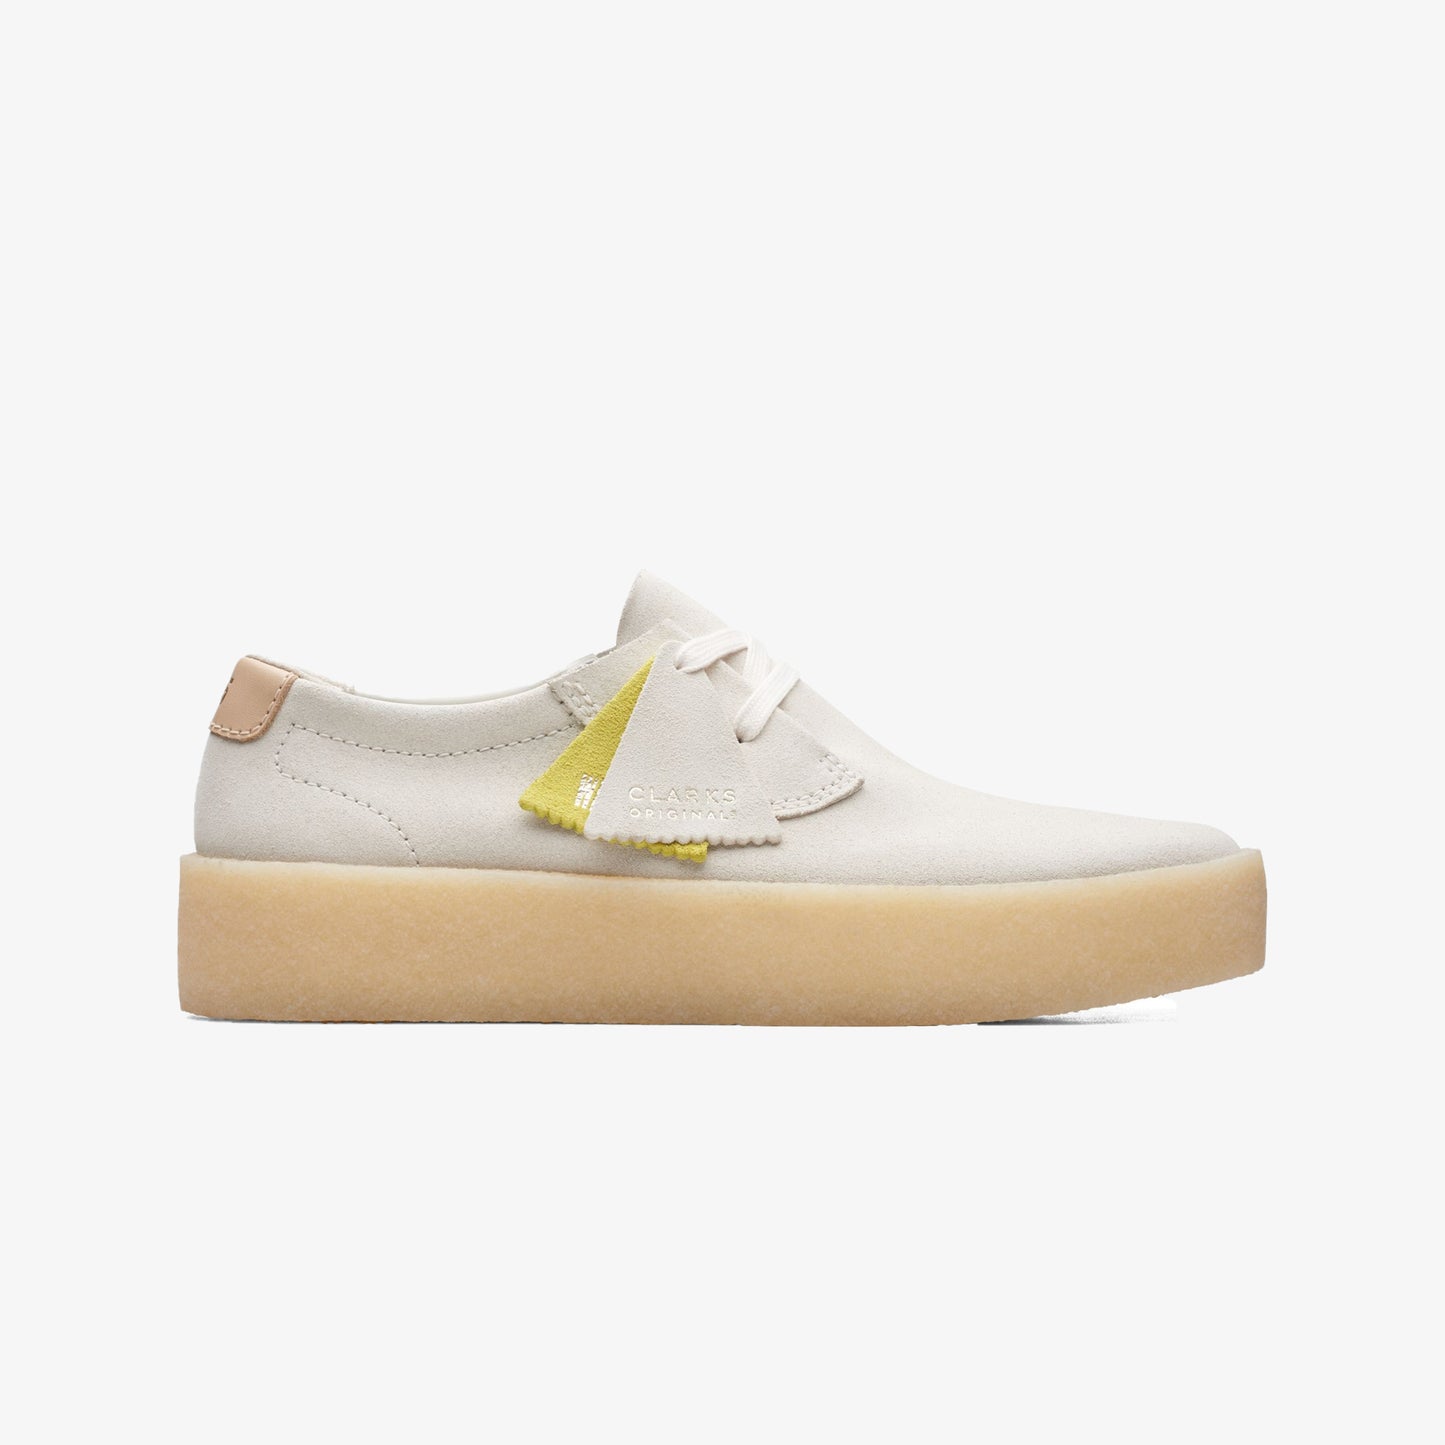 ASHCOTT CUP 'OFF WHITE SUEDE '